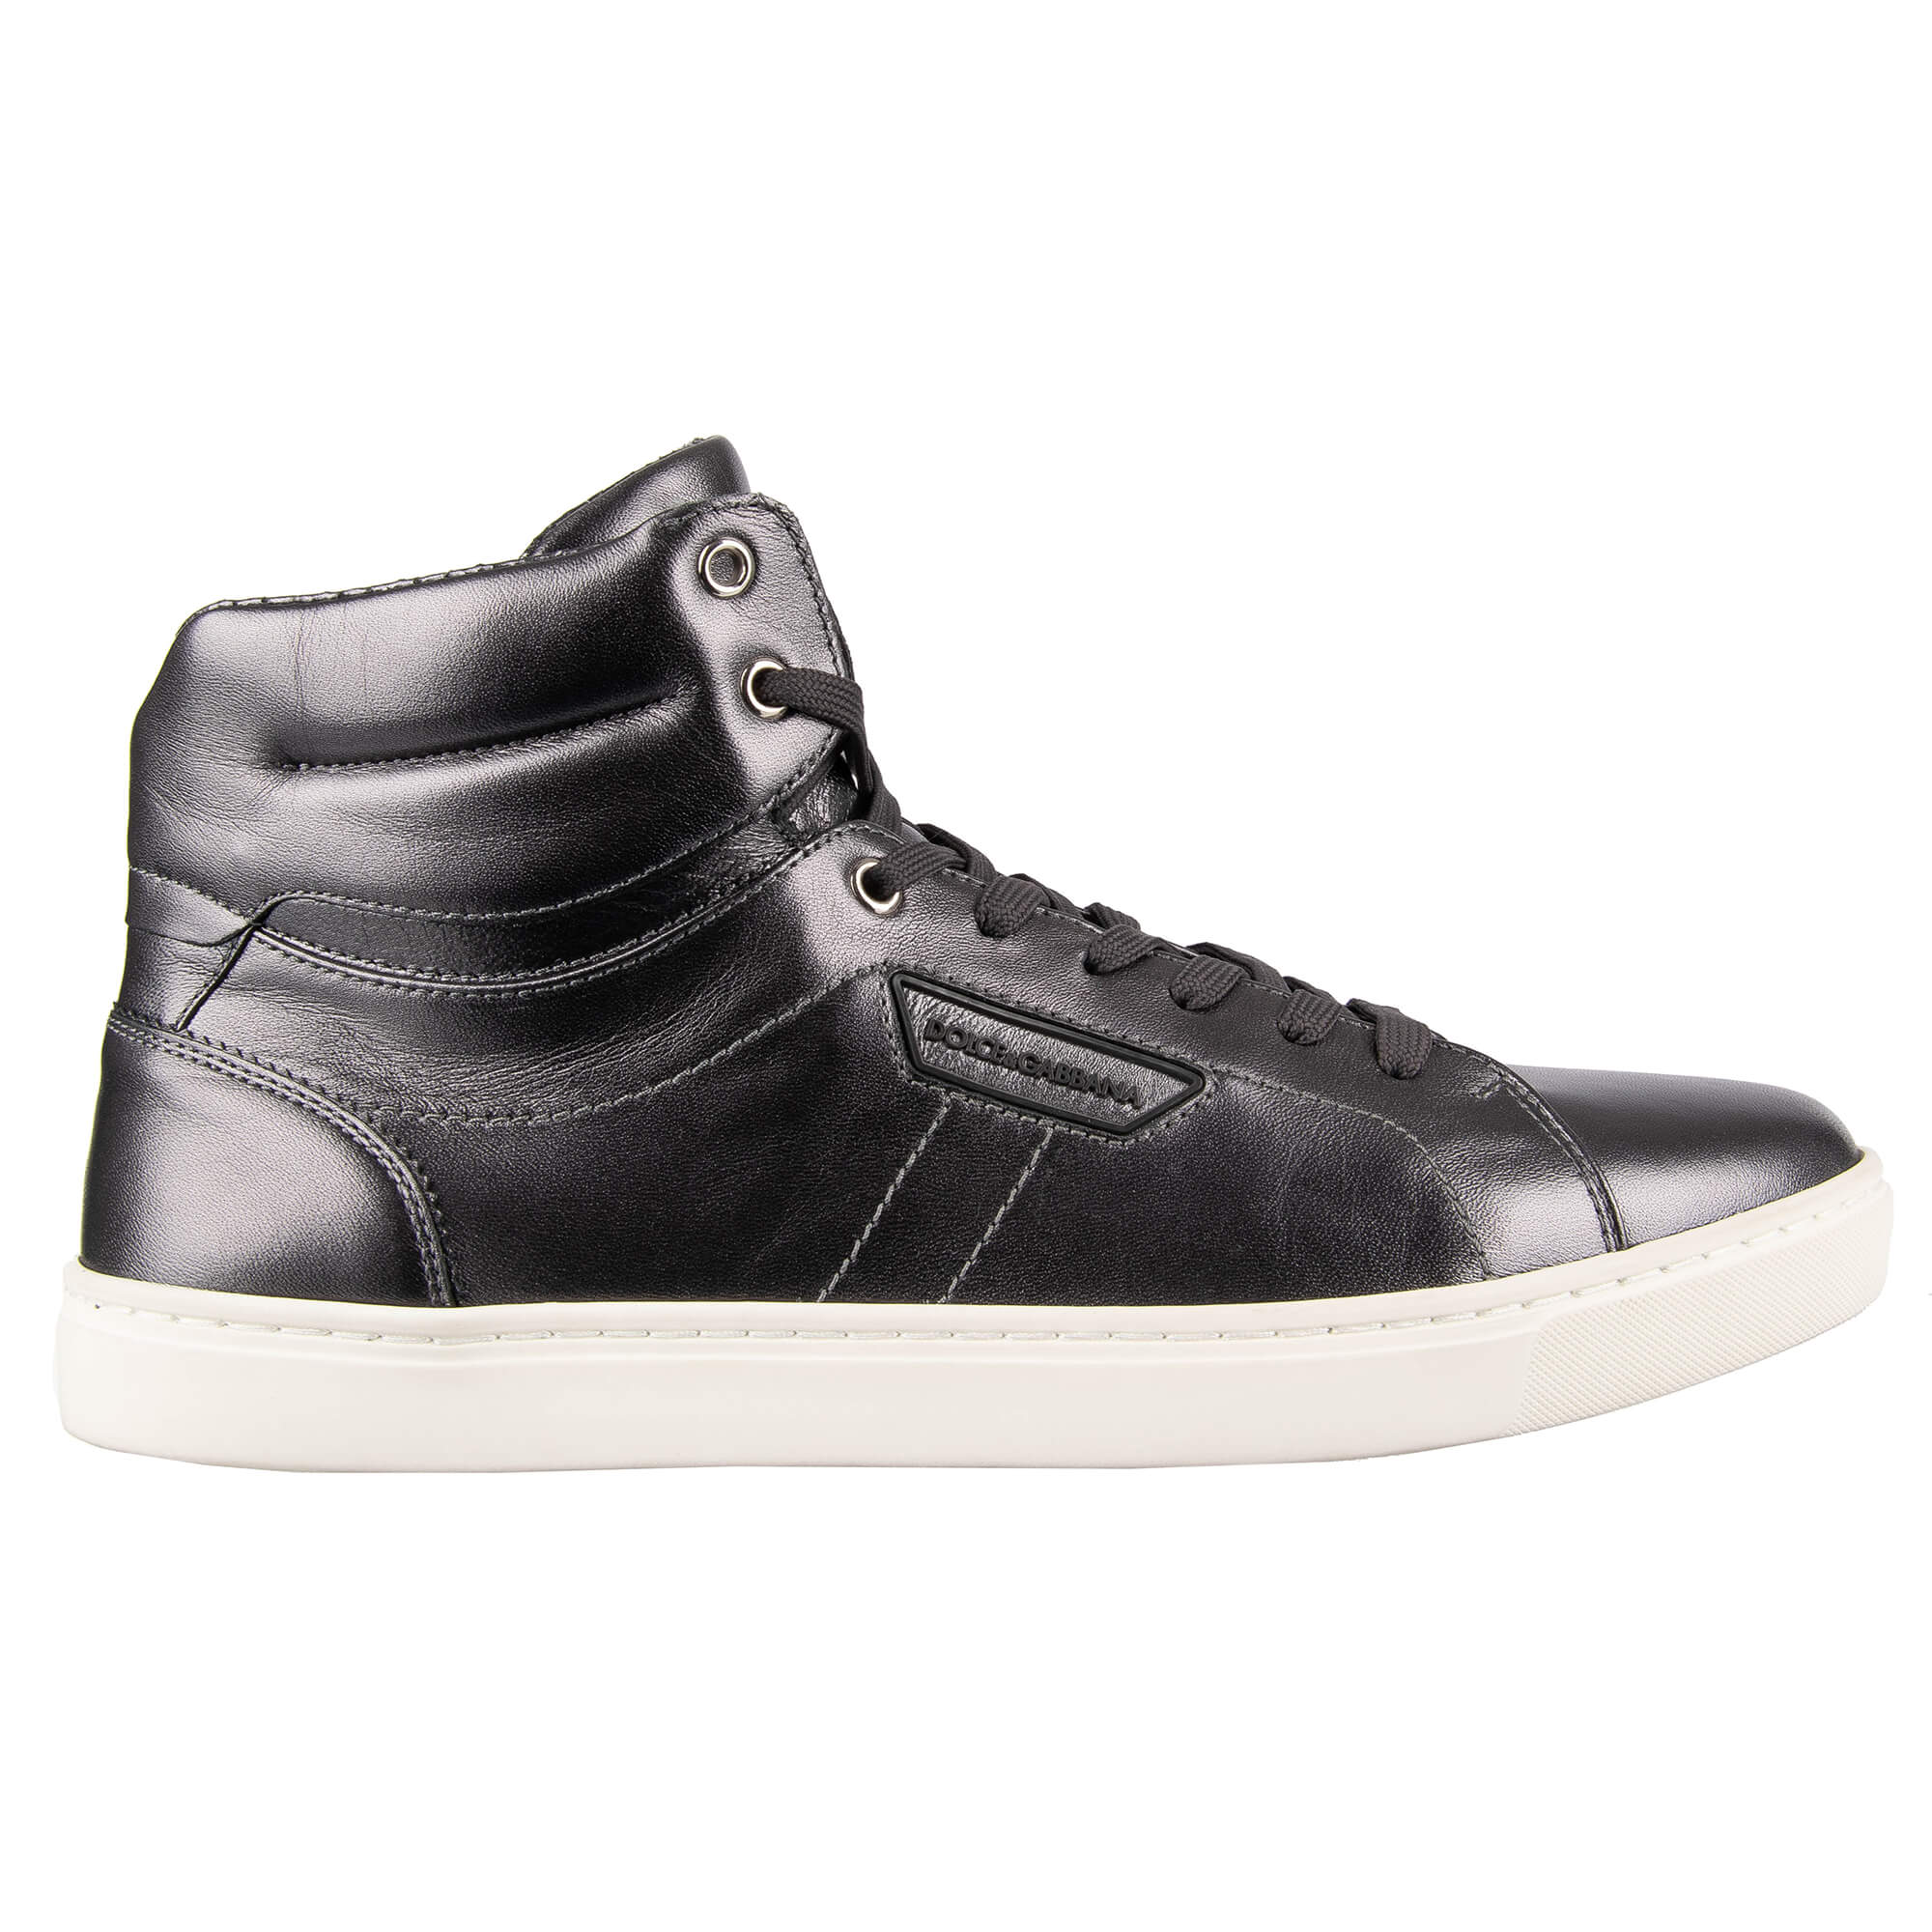 Dolce & Gabbana High-Top Leather Sneakers LONDON Silver | FASHION ROOMS